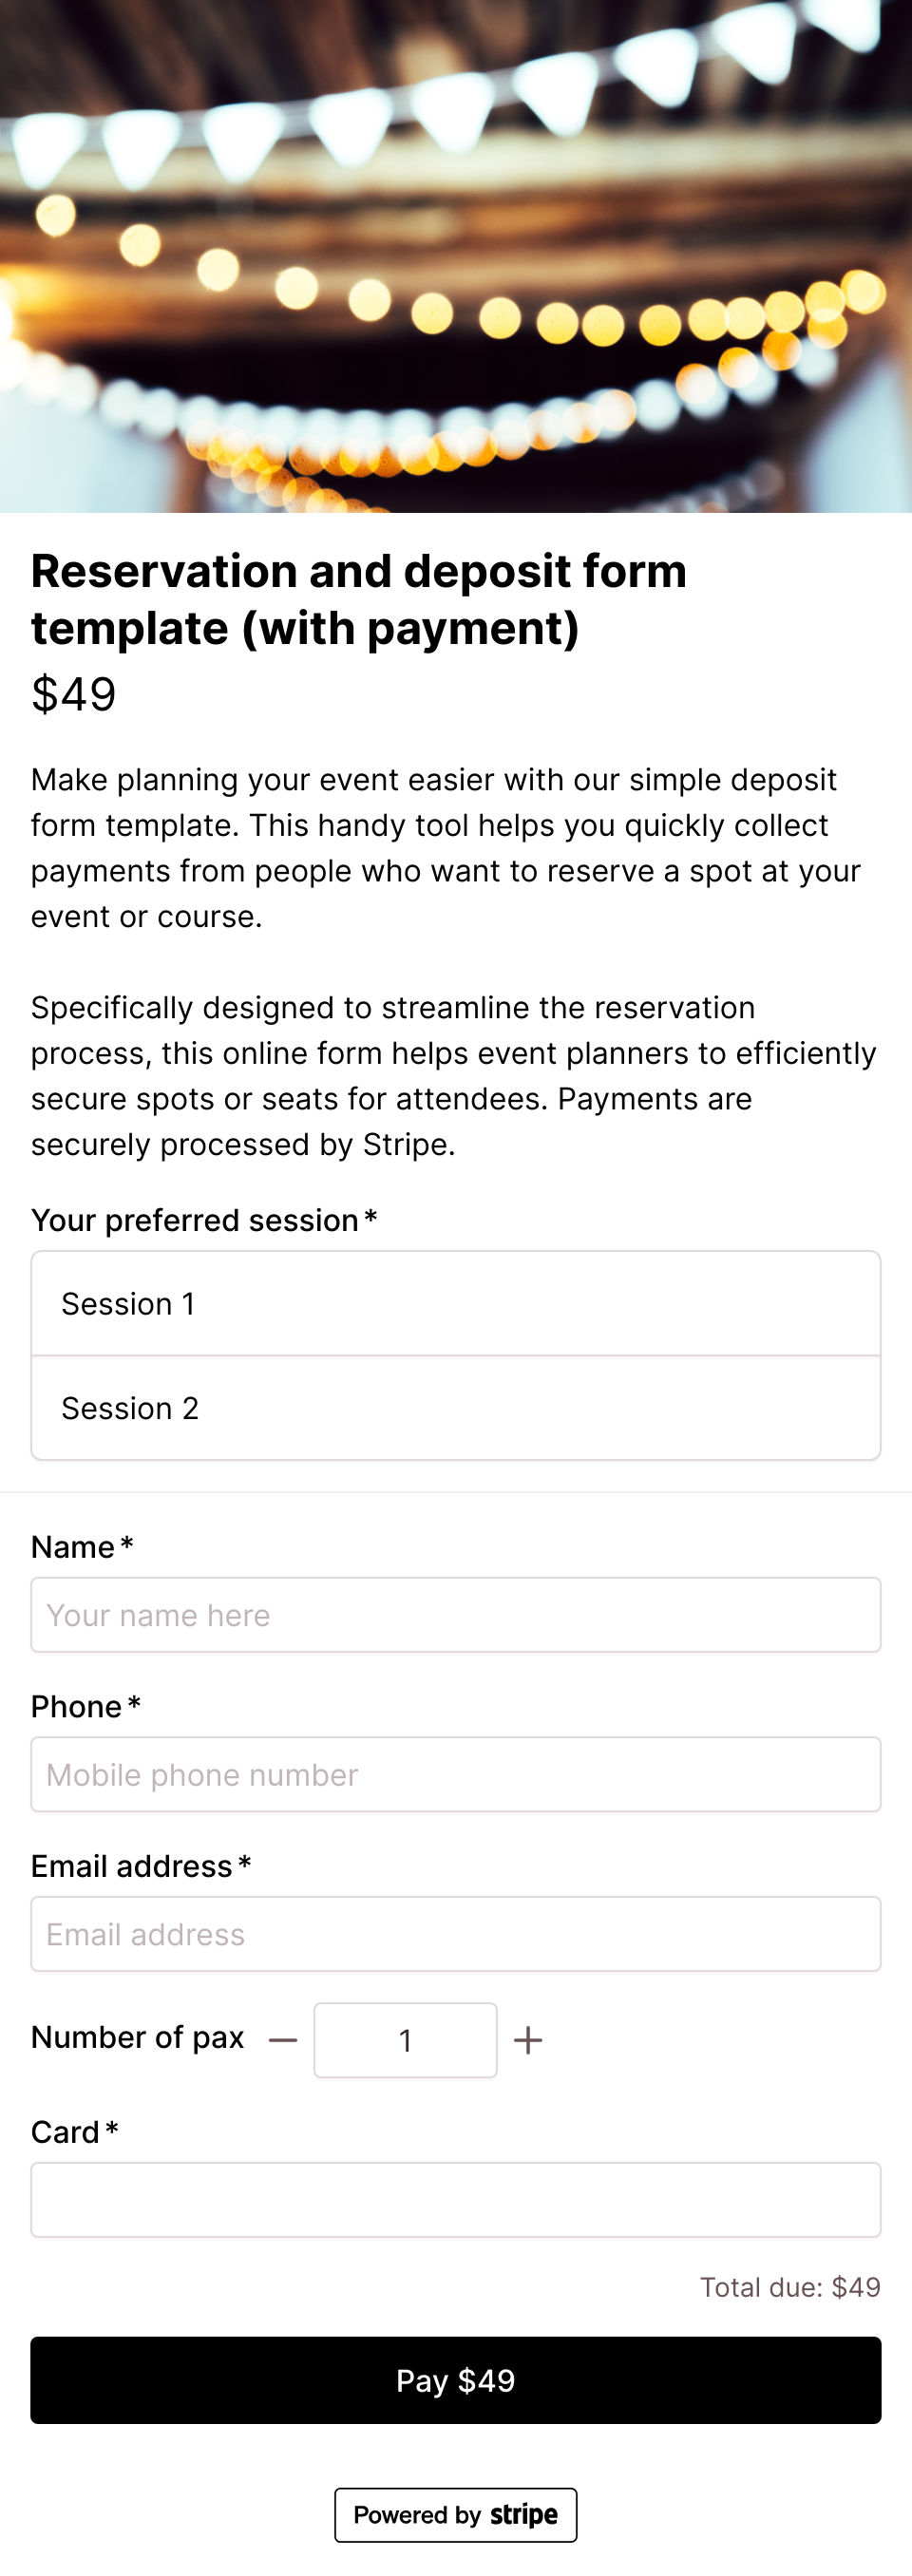 Reservation and deposit form template (with payment)